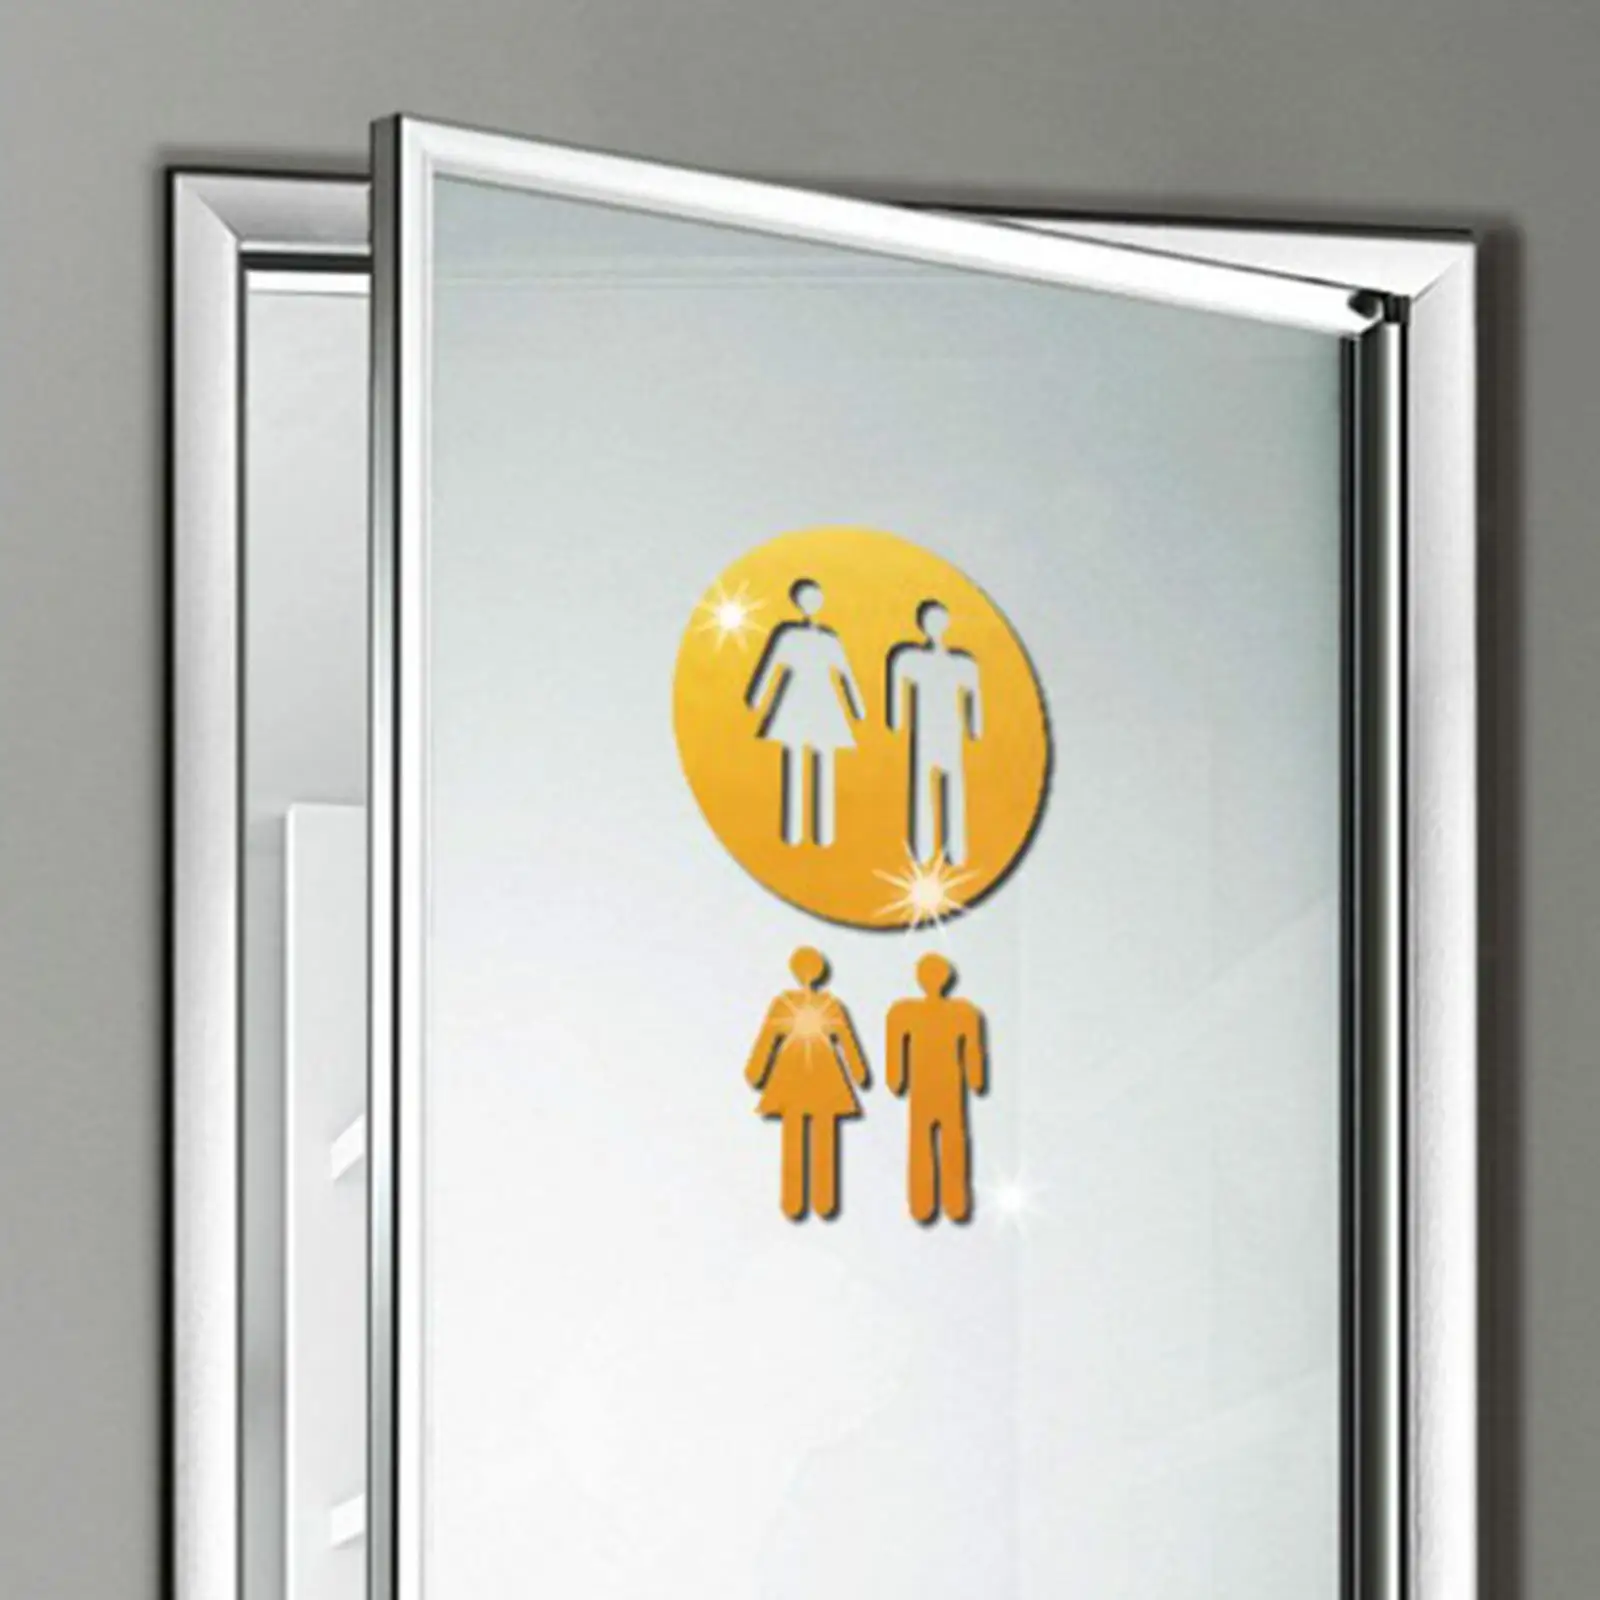 Men and Women Restroom Signs Symbols Pictogram Acrylic Toilet Door Plates Sign Placard for Commercial Office Business